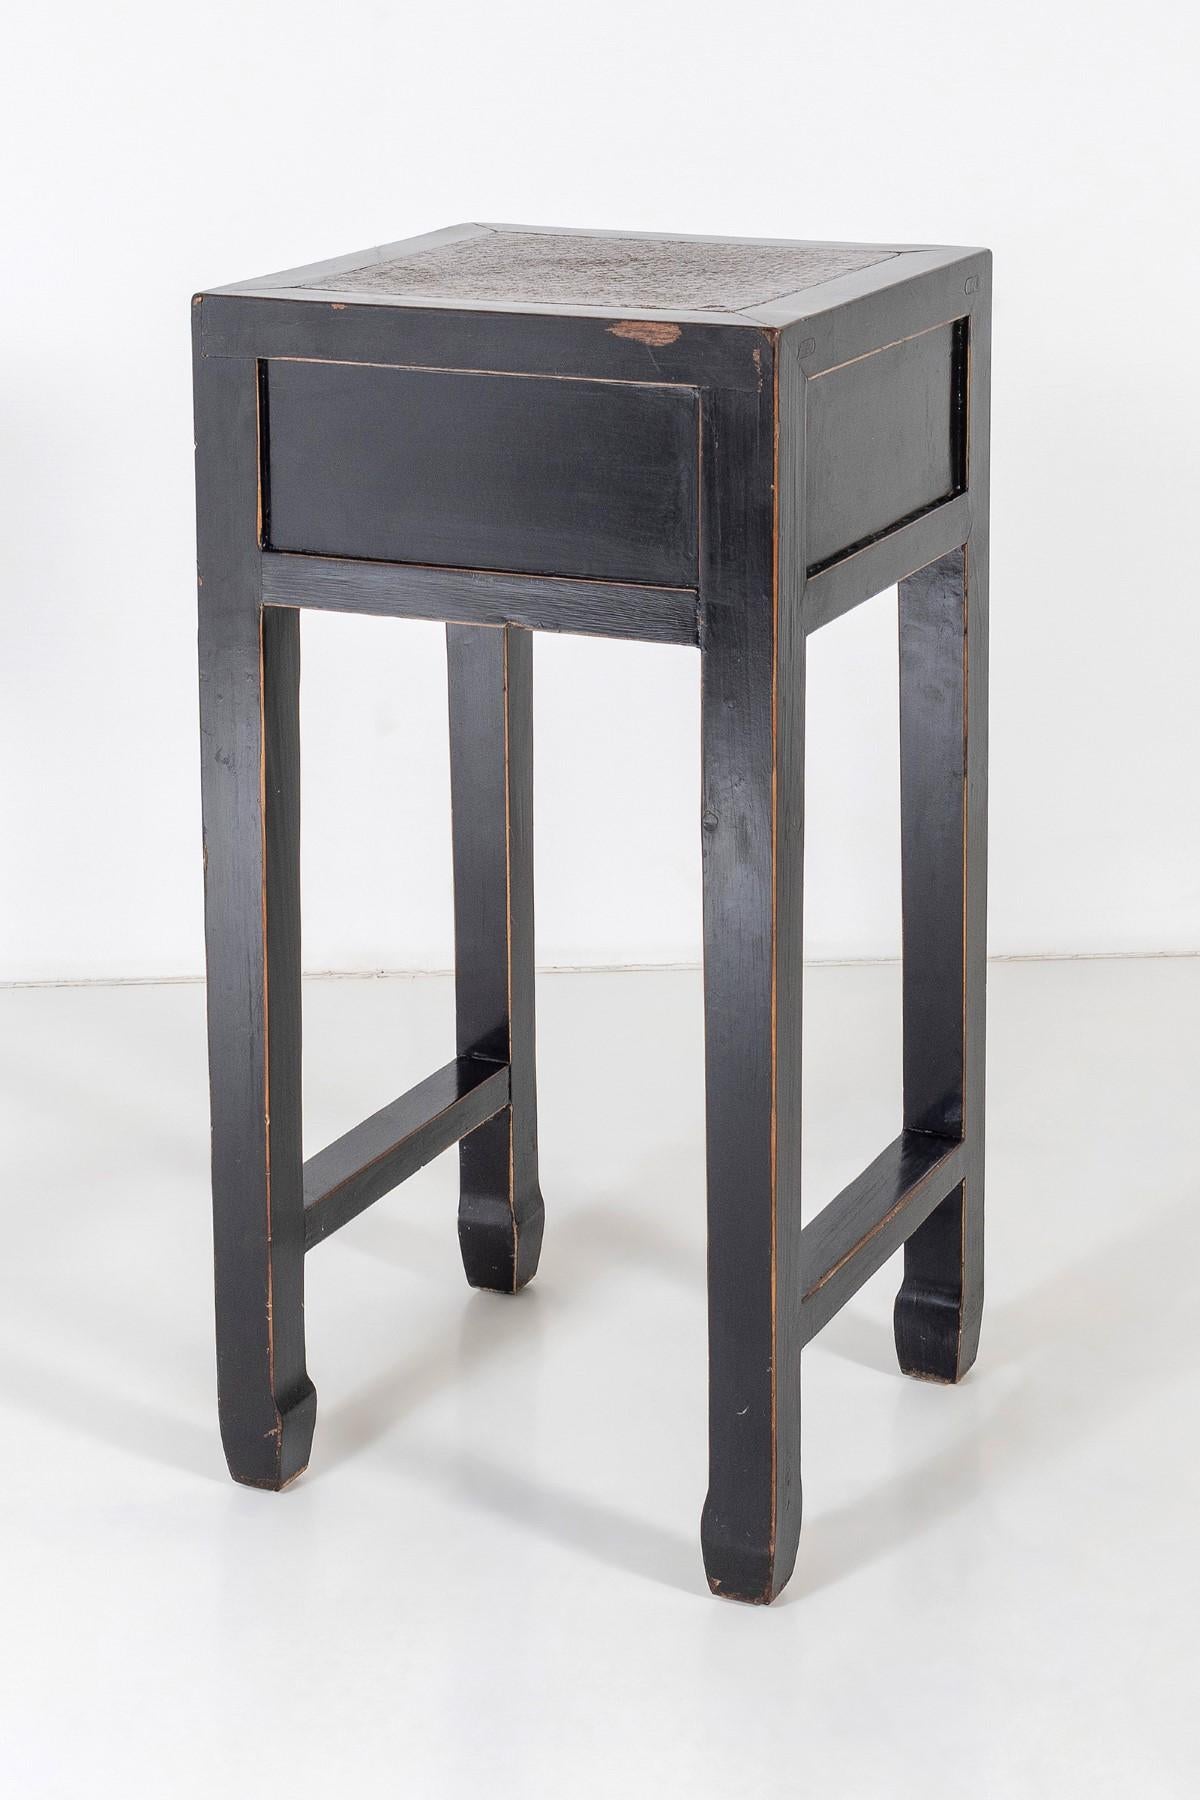 Black Ebonised Lacquered Chinese Side Table with Cane Top and Single Drawer In Good Condition For Sale In Llanbrynmair, GB